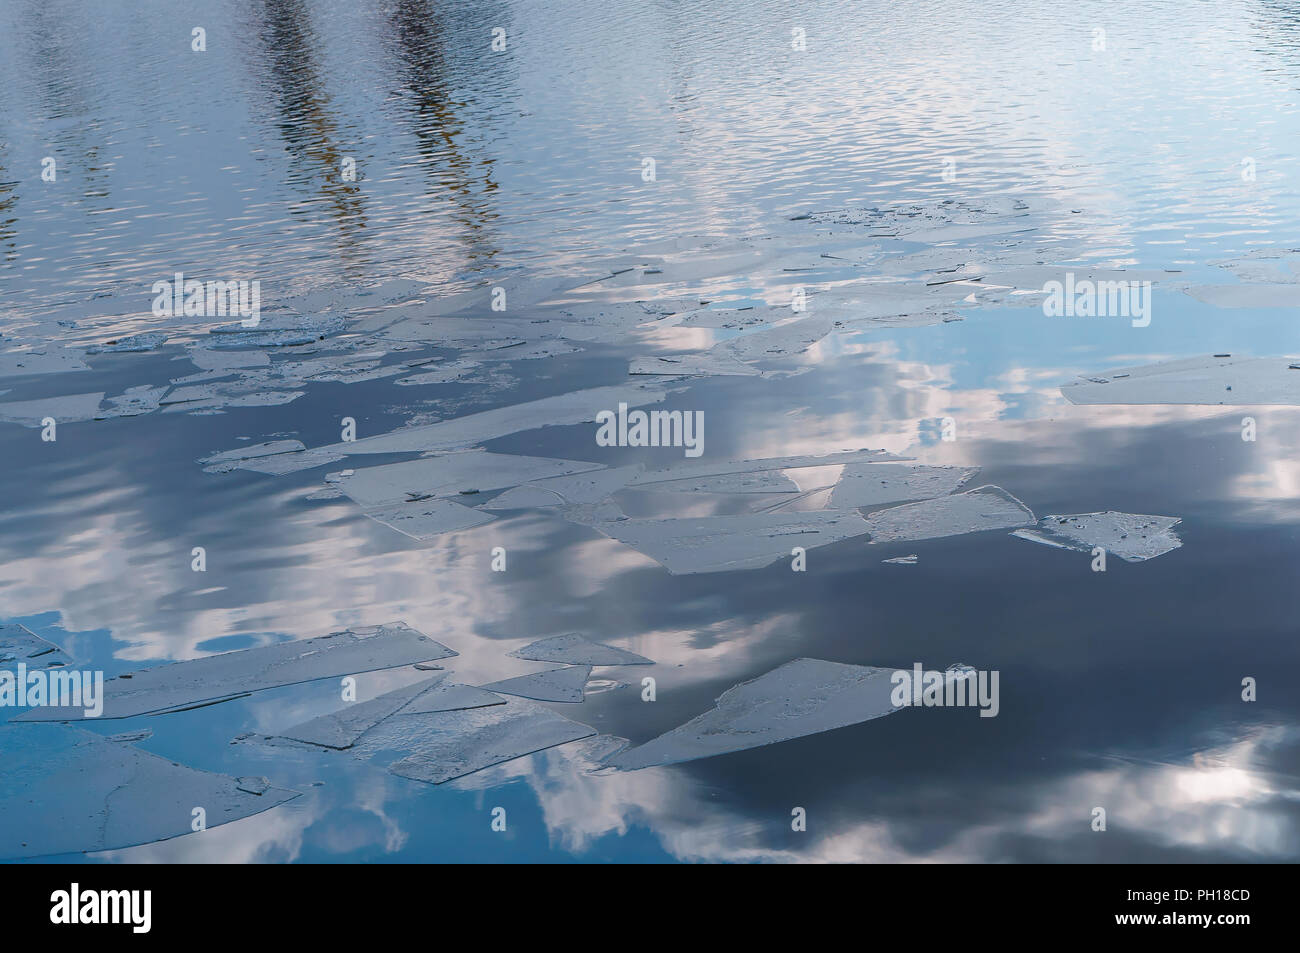 pieces of ice on the water in early spring, clouds reflected in the water Stock Photo